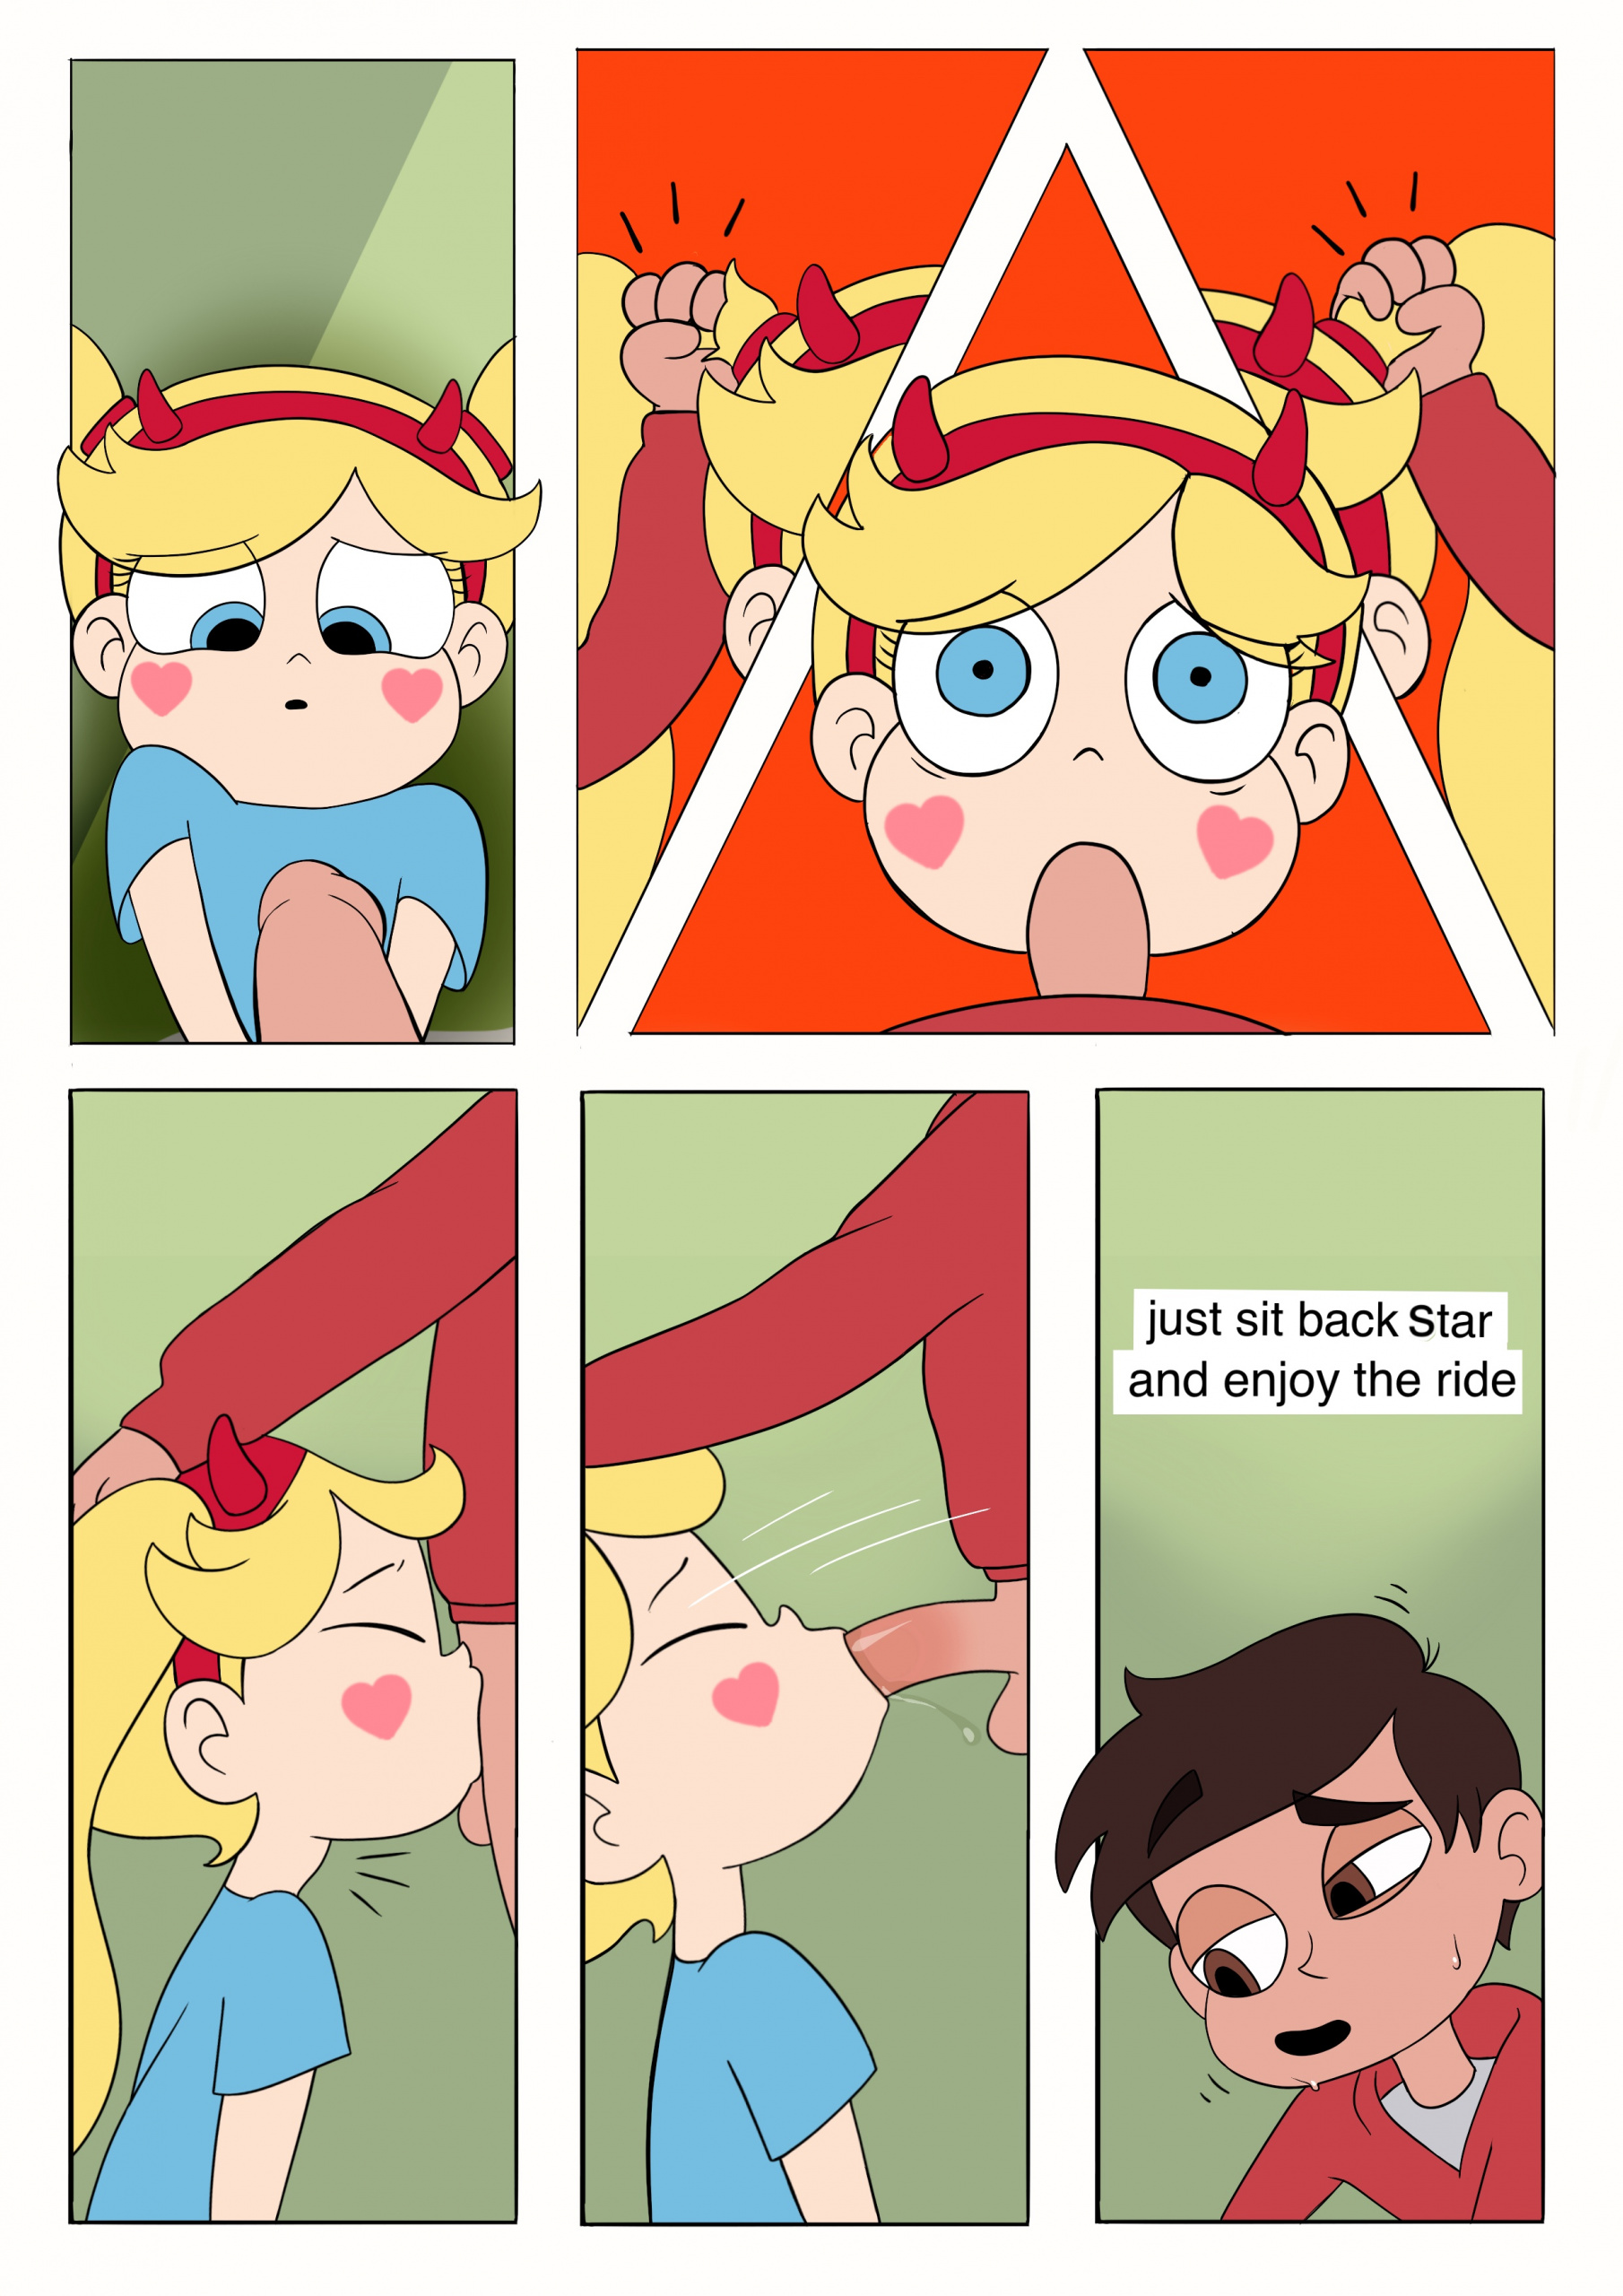 Star Vs the Forces of Evil - Dude-Doodle-Do porn comics Oral sex, Lolicon, Straight Shota